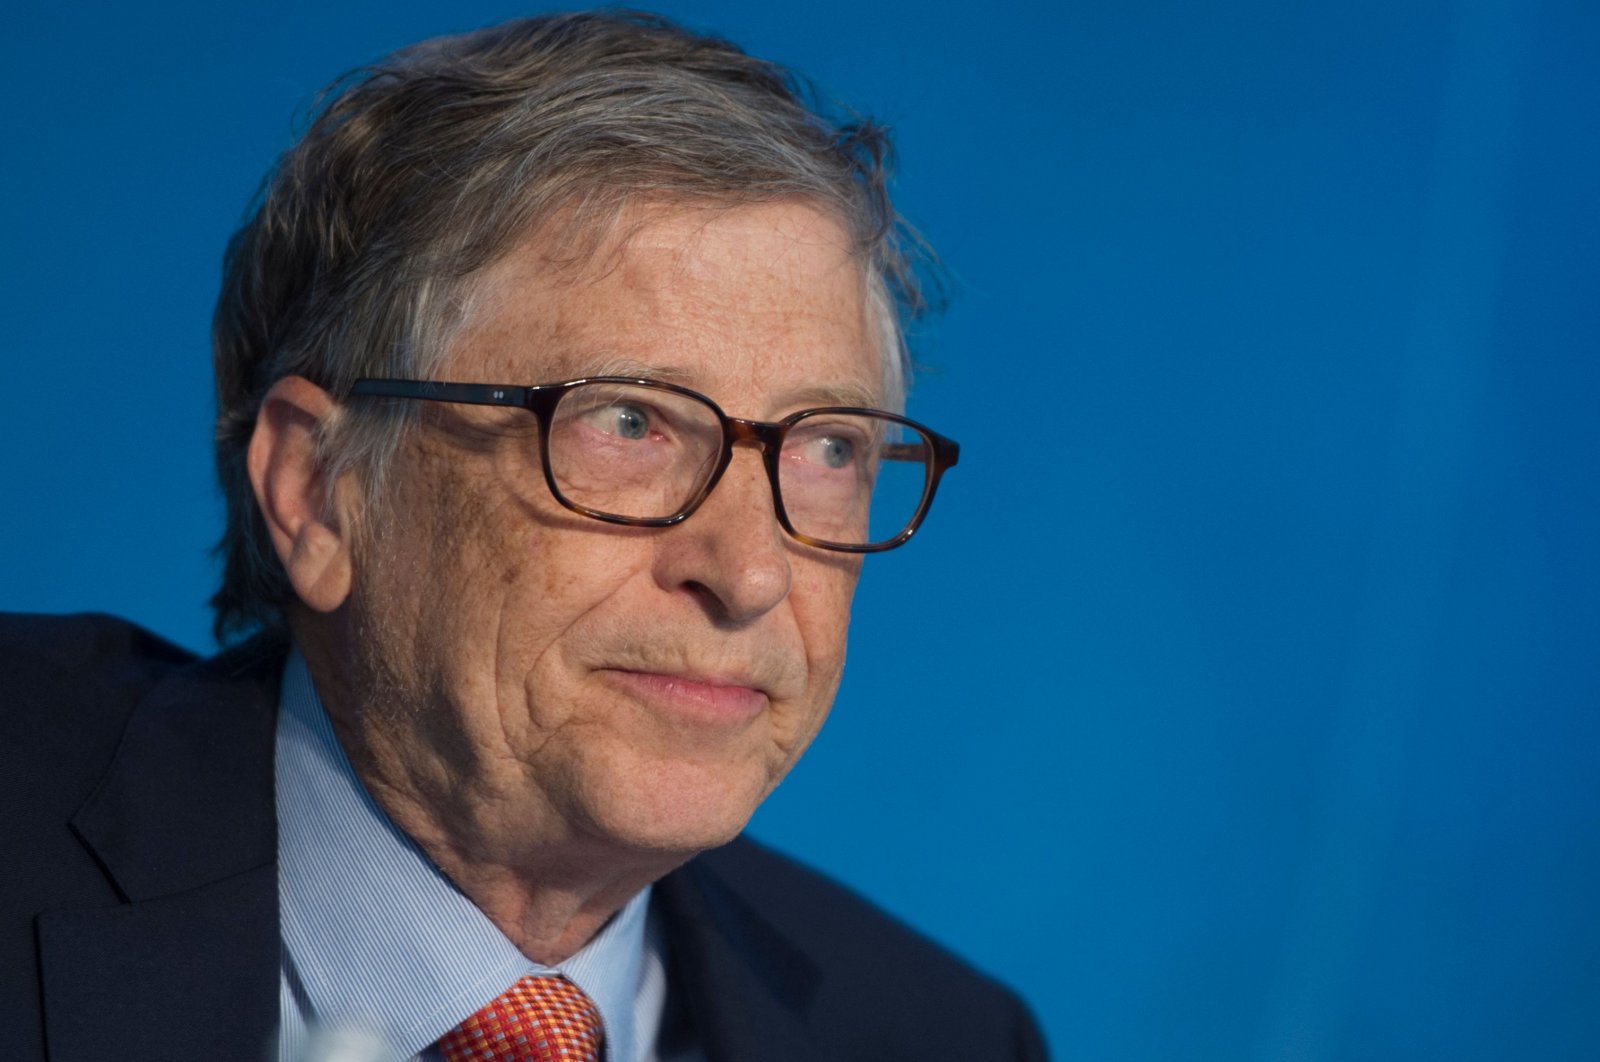 Co-Chair of the Bill & Melinda Gates Foundation, Bill Gates, looks on during the discussion "Building Human Capital: A project for the world" in the IMF/World Bank spring meeting in Washington, D.C., U.S., April 21, 2018. (AFP Photo)